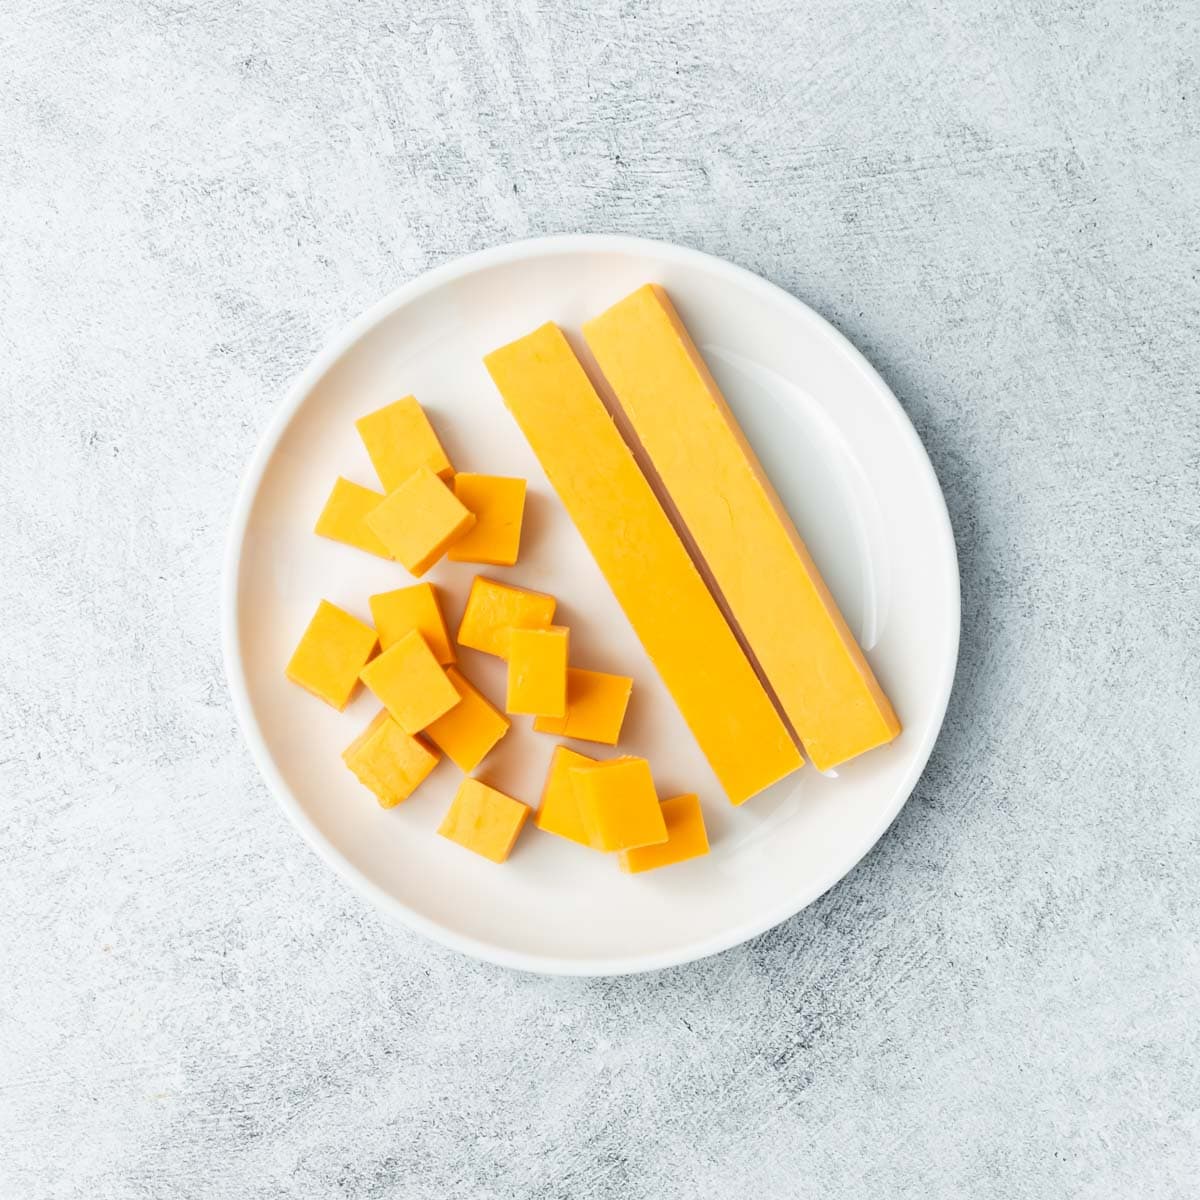 Cubed cheese and 2 cheese strips on a white plate.